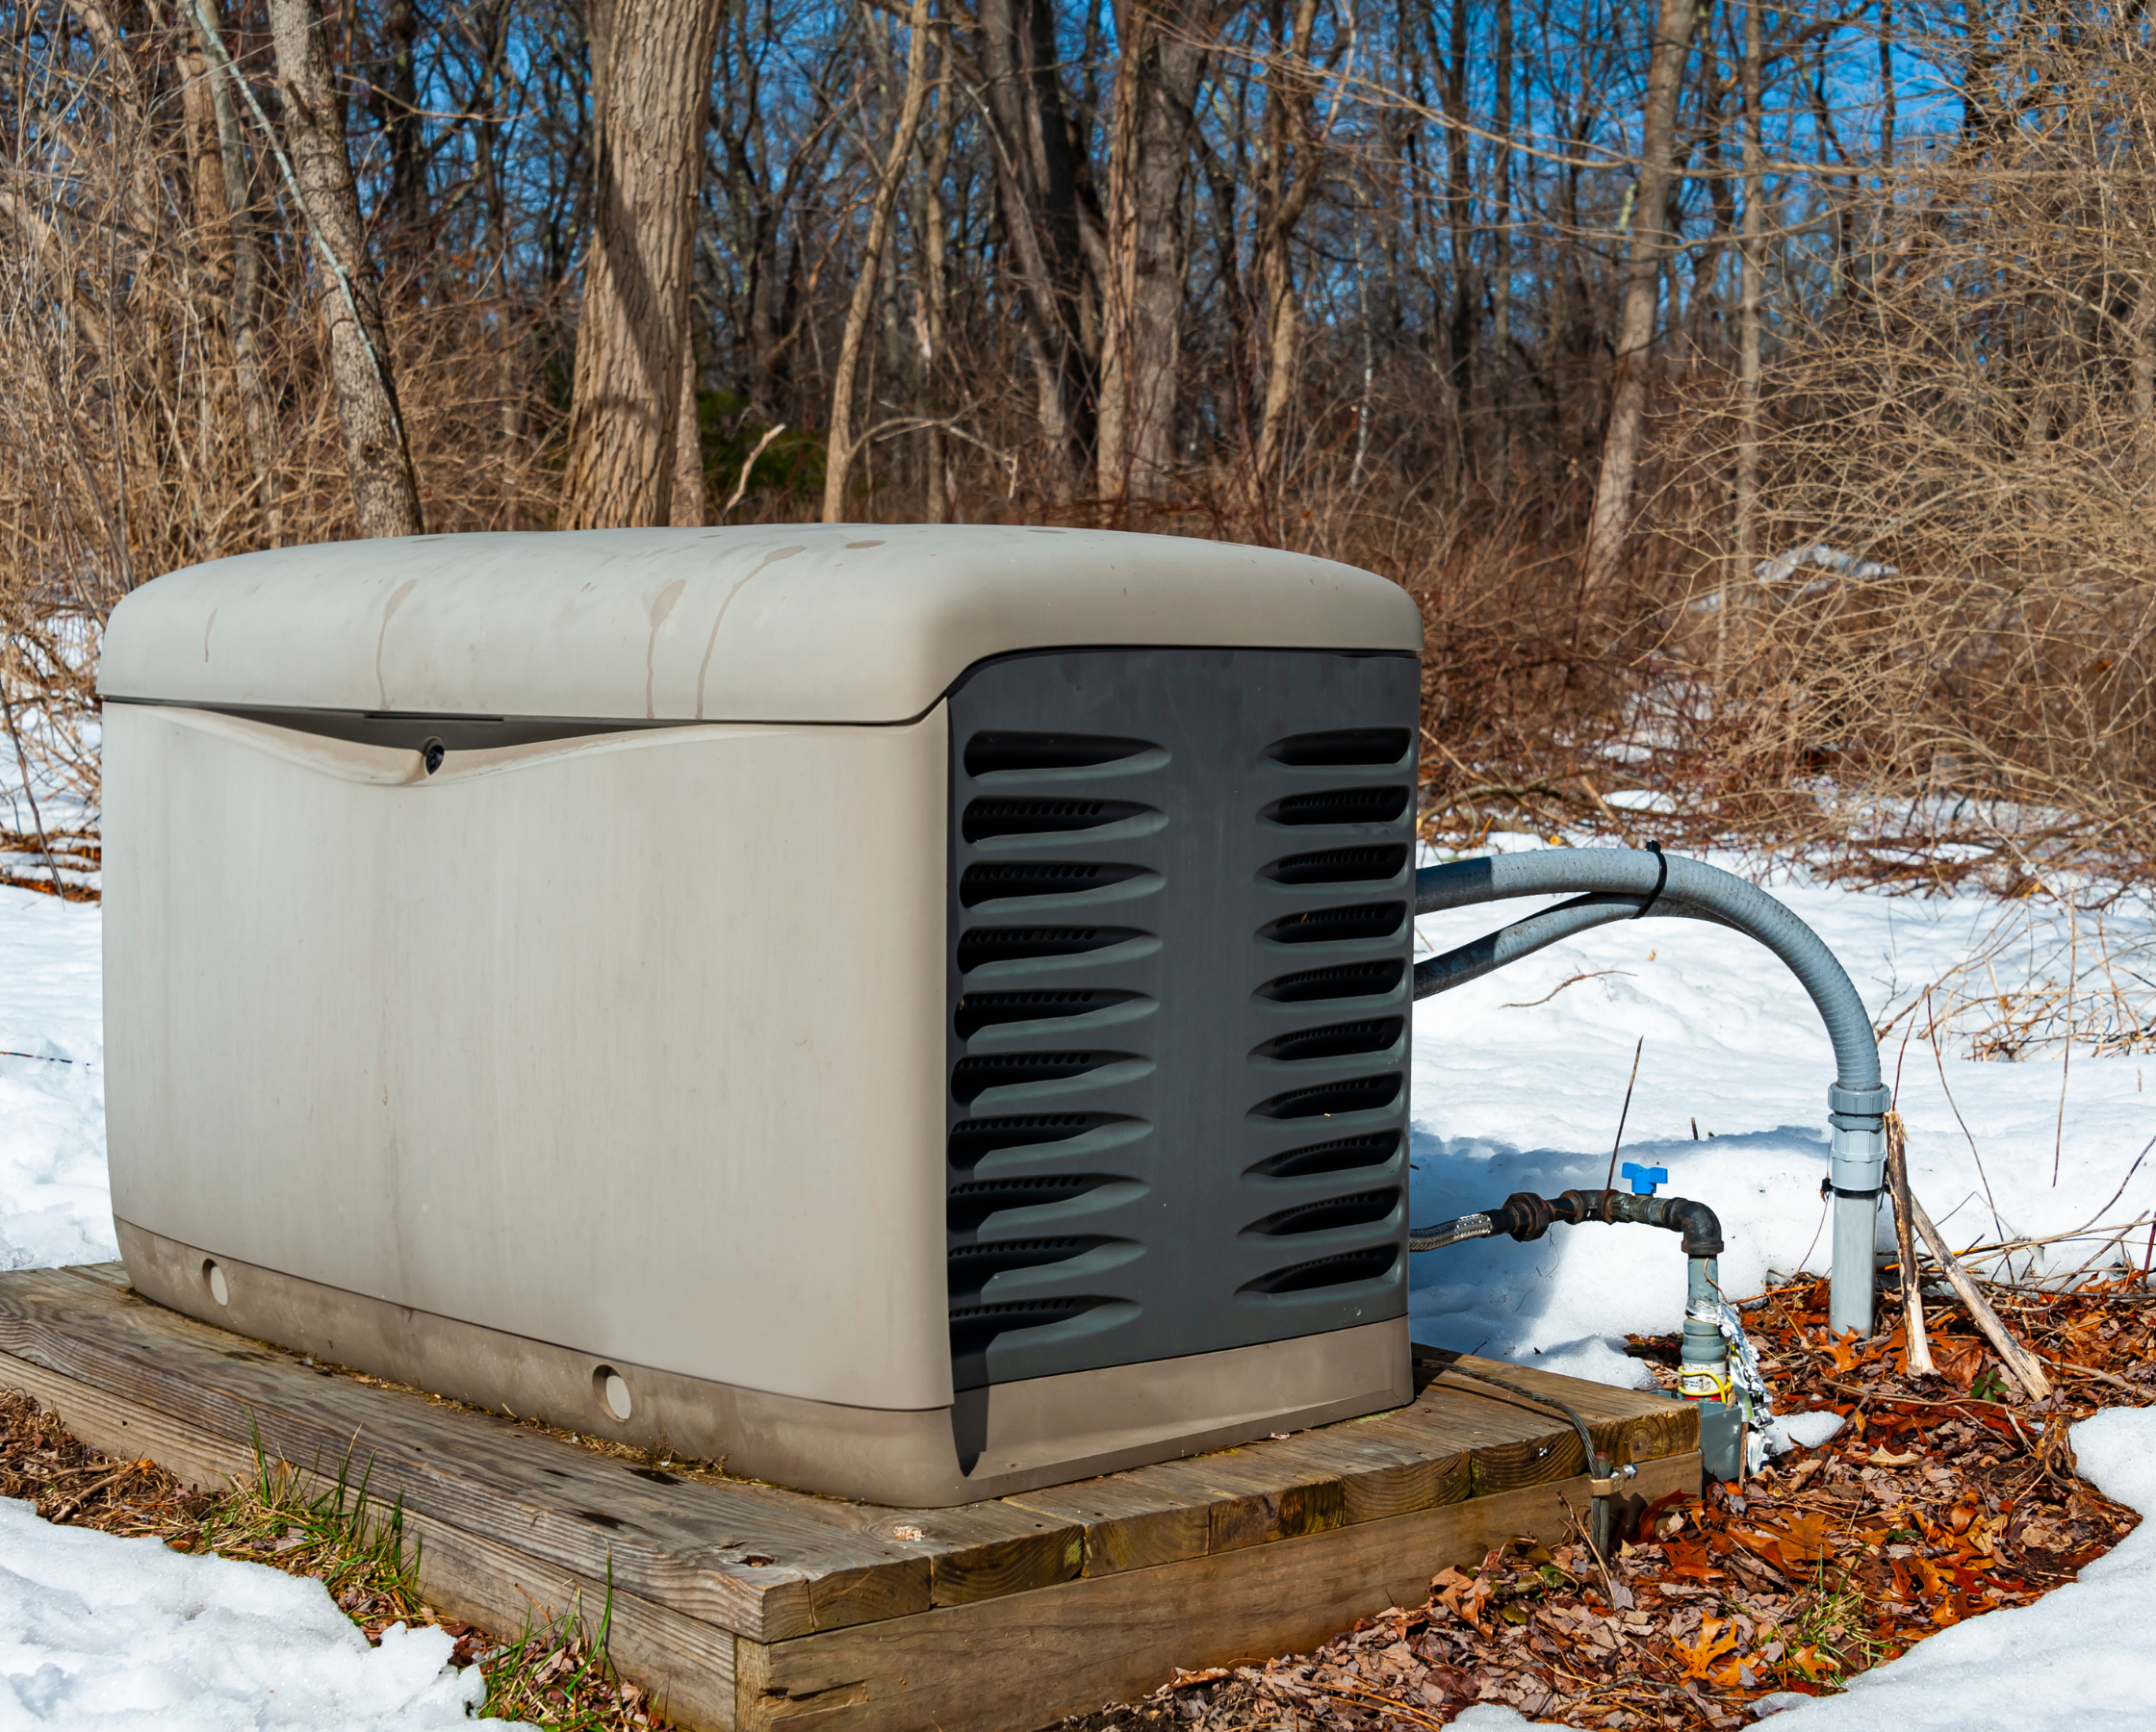 What Makes Propane the Best Choice for Standby Power?